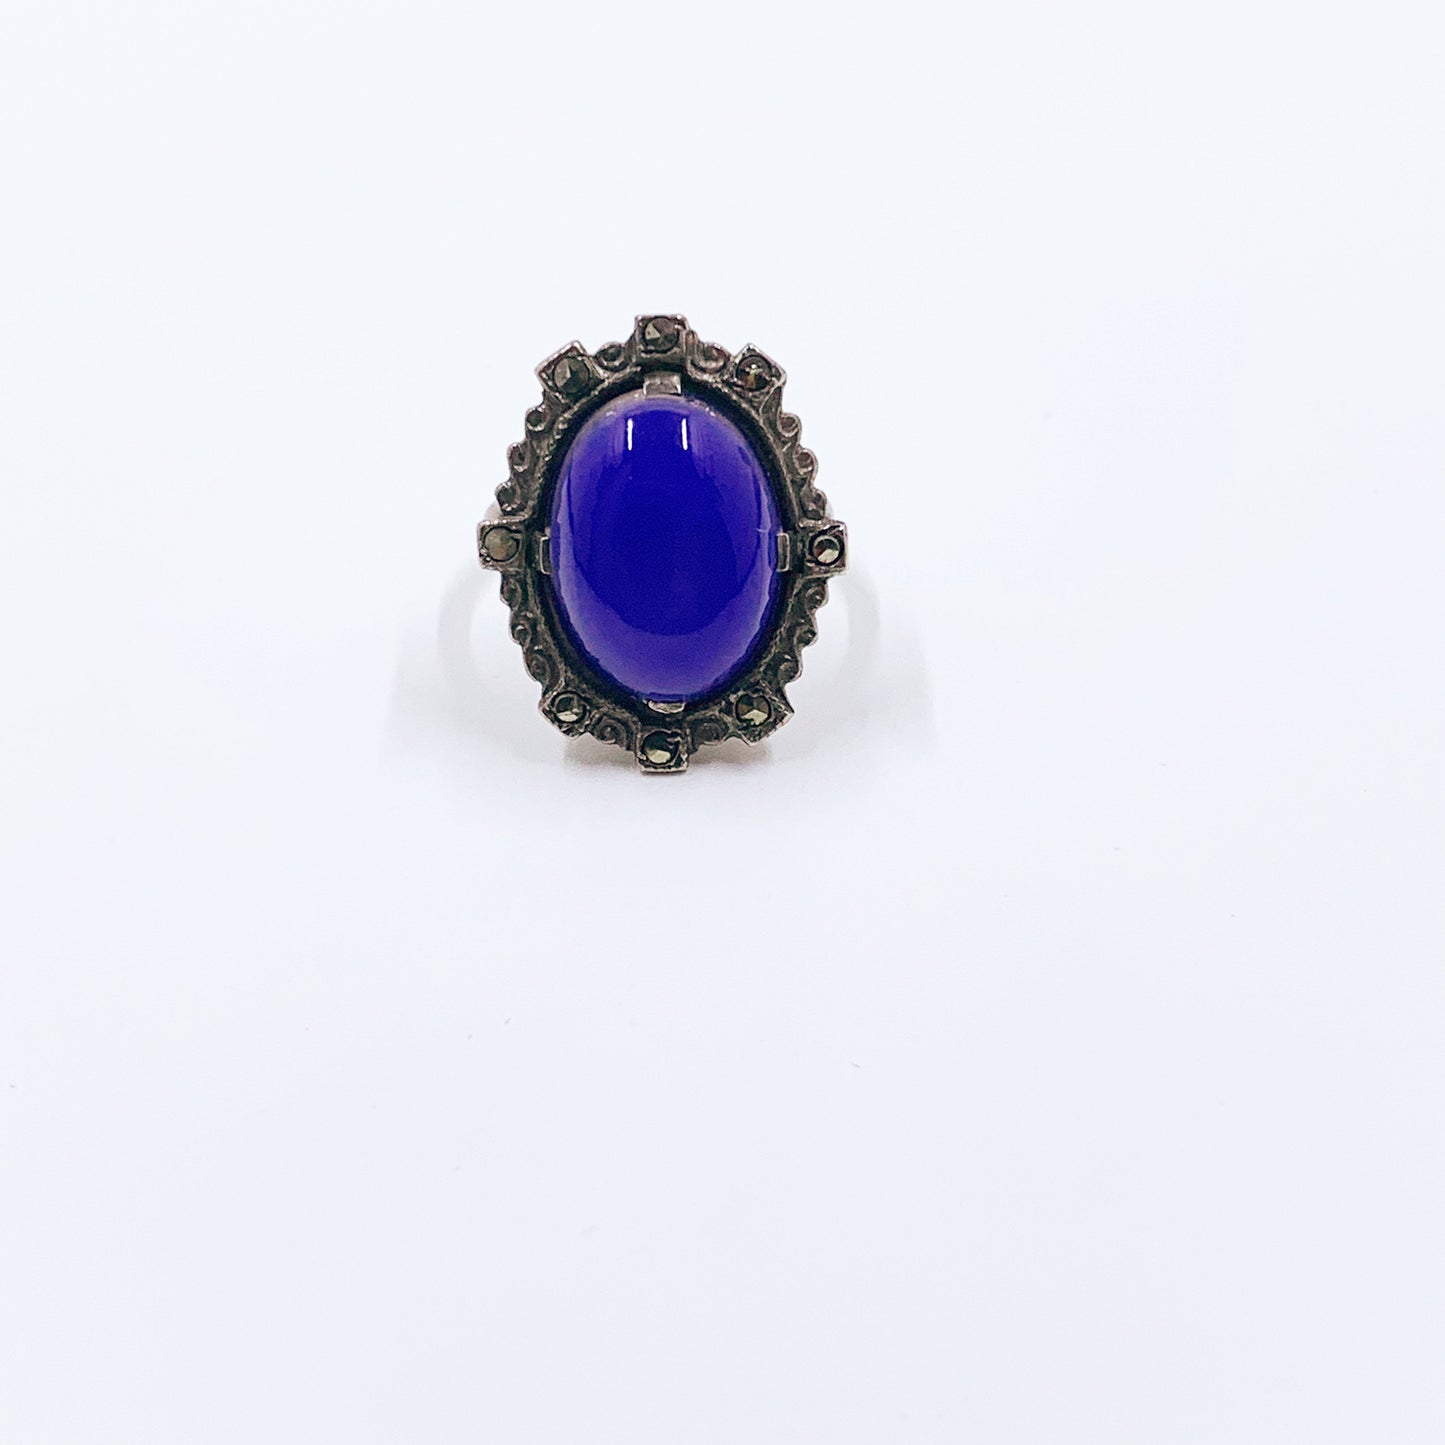 Vintage Sterling Silver Art Deco Style Ring | Marcasite Blue Glass Ring | Size 4 Ring